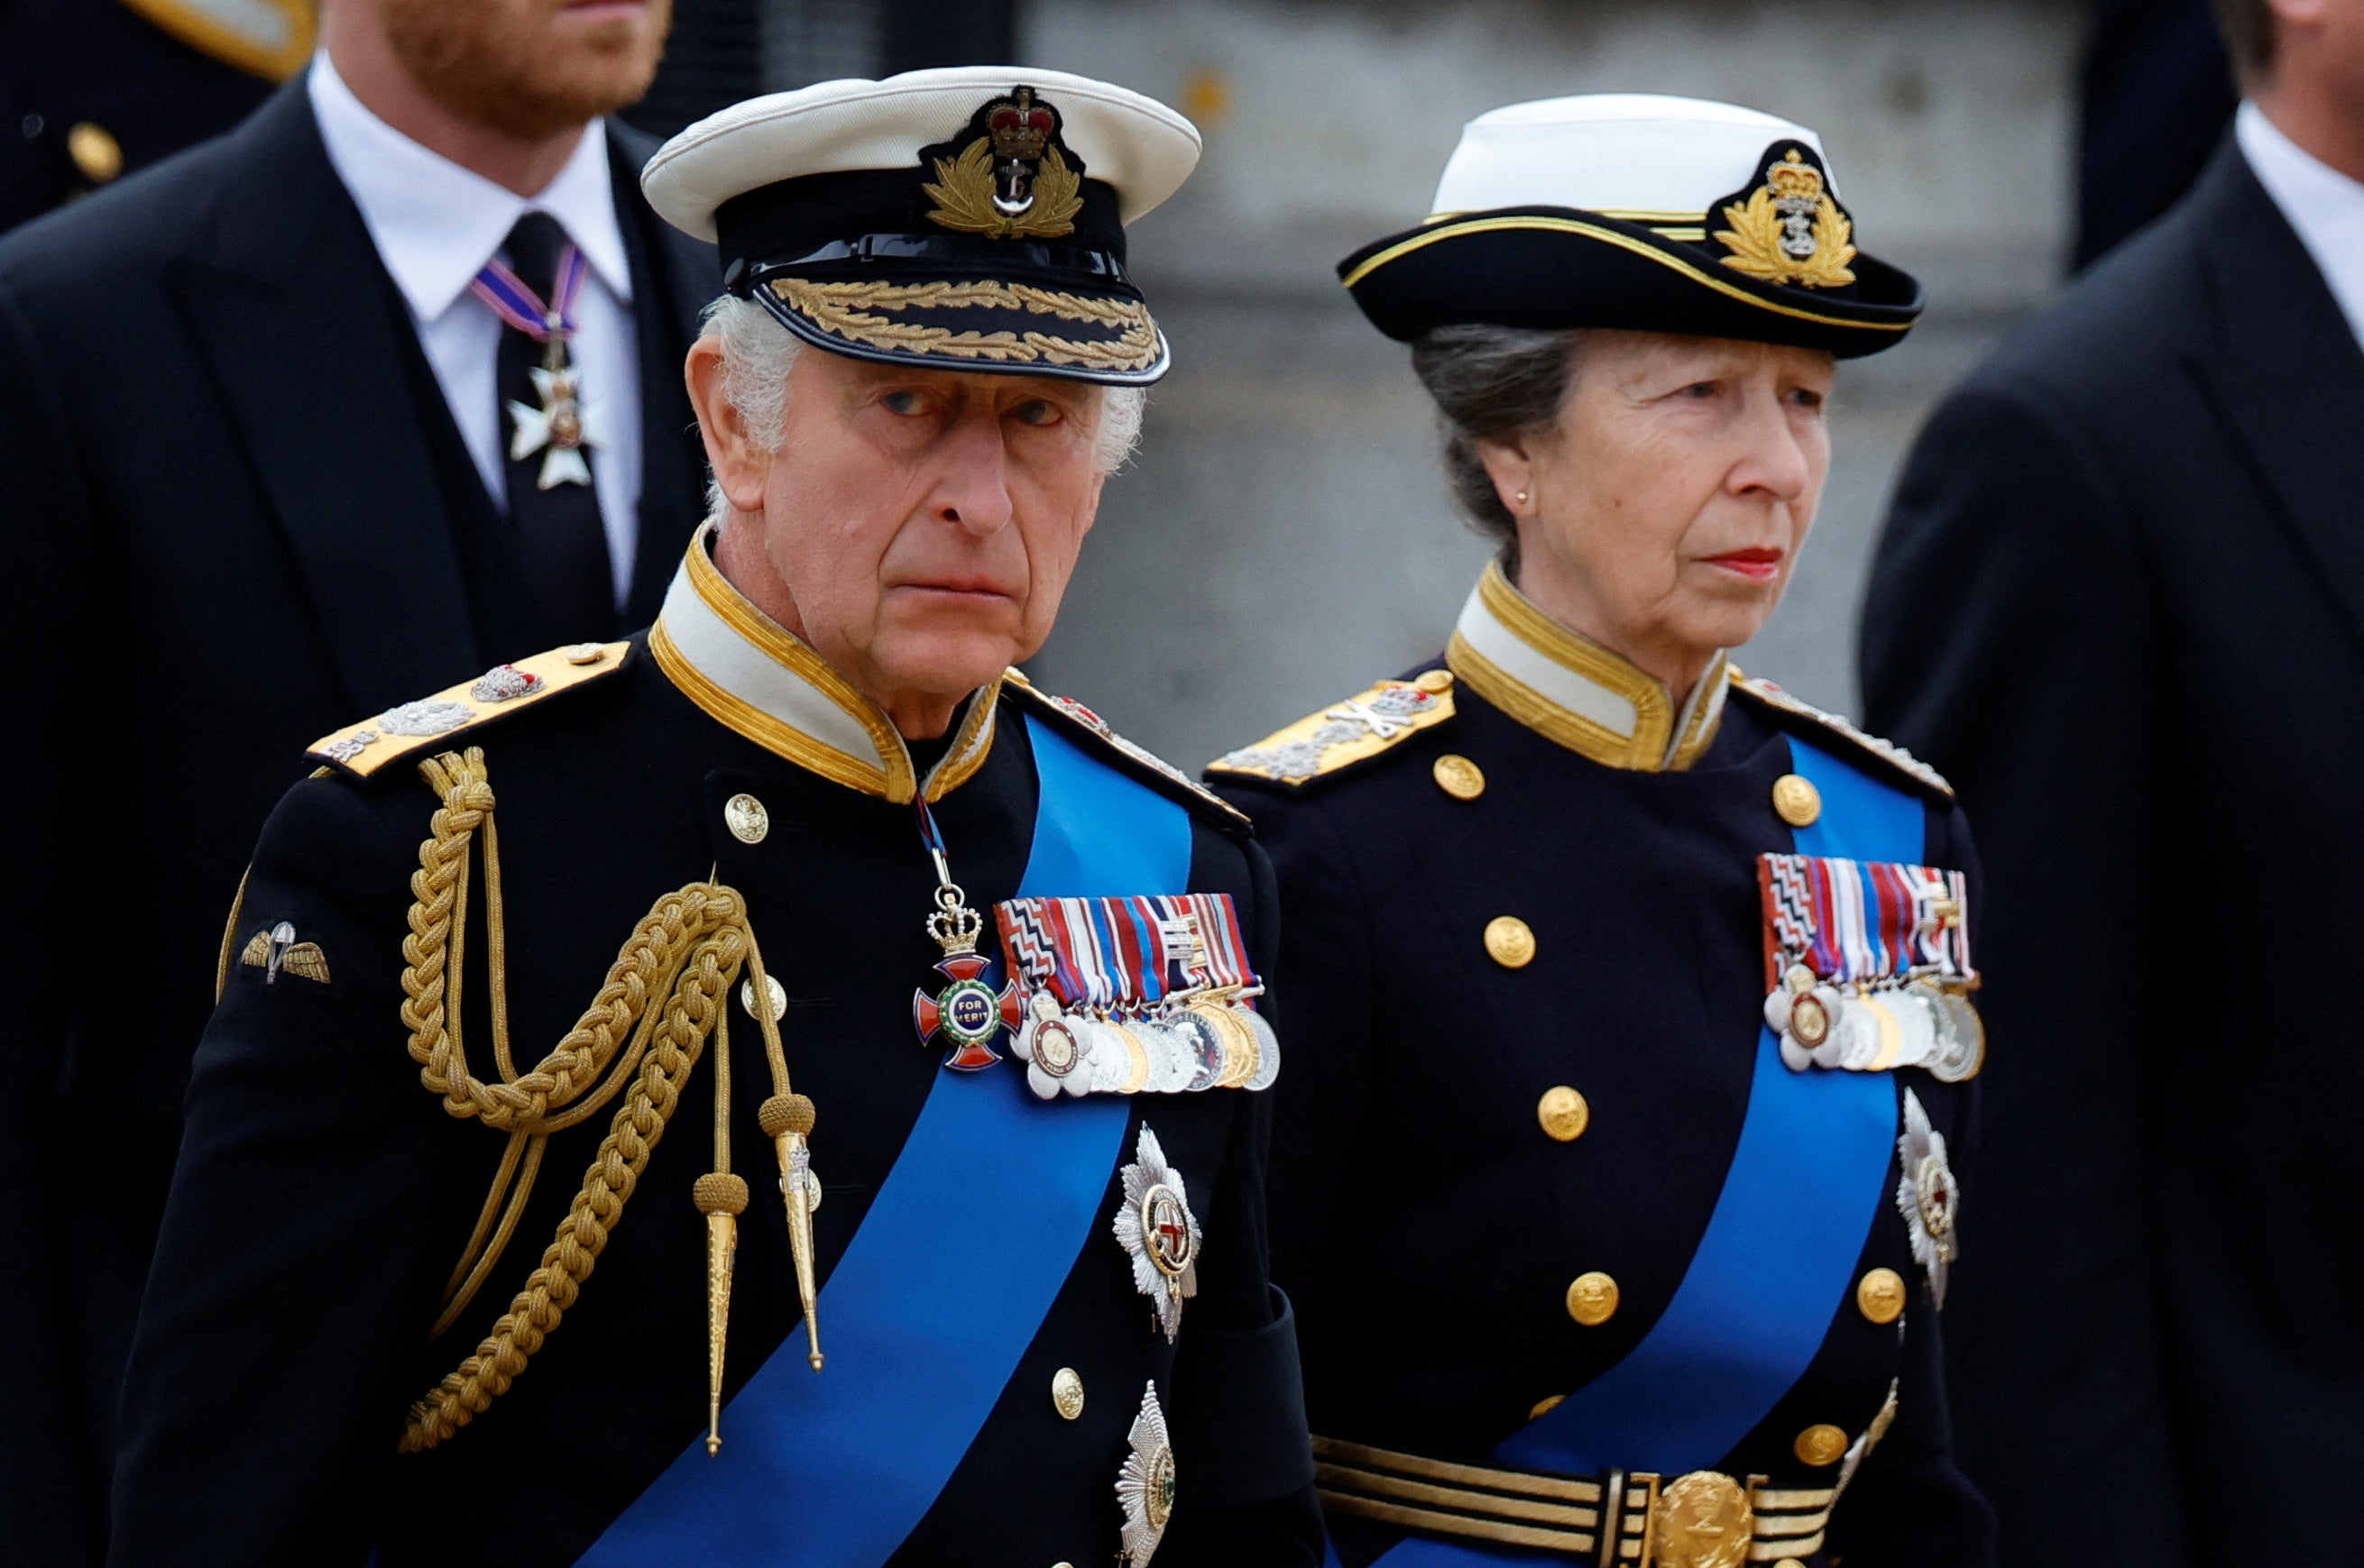 King Charles III and the Princess Royal arrive for the State Funeral of Queen Elizabeth II